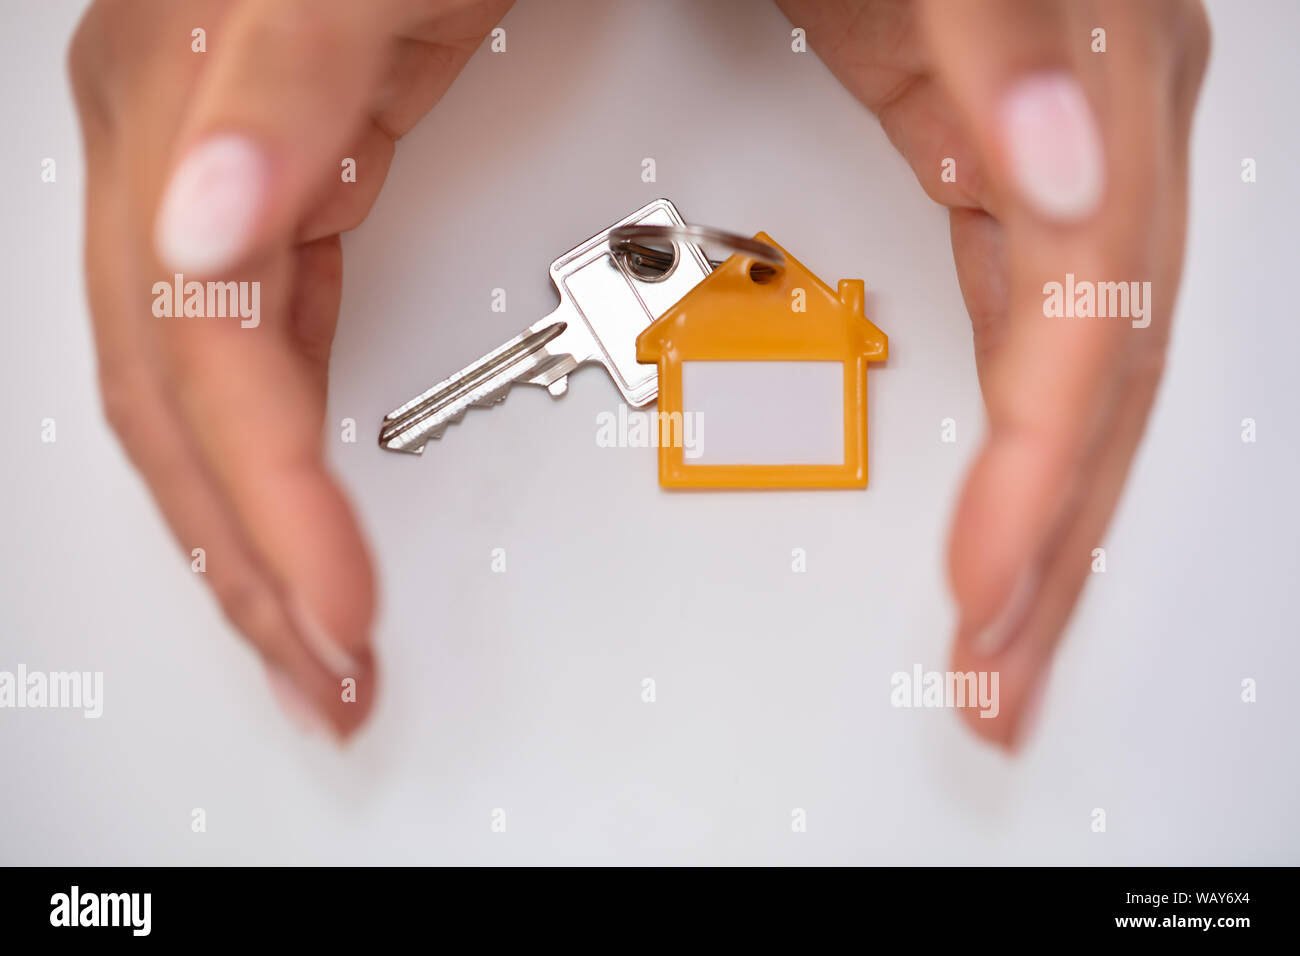 Close-up Of Person's Hand Protecting House Key With Keychain On White Desk Stock Photo